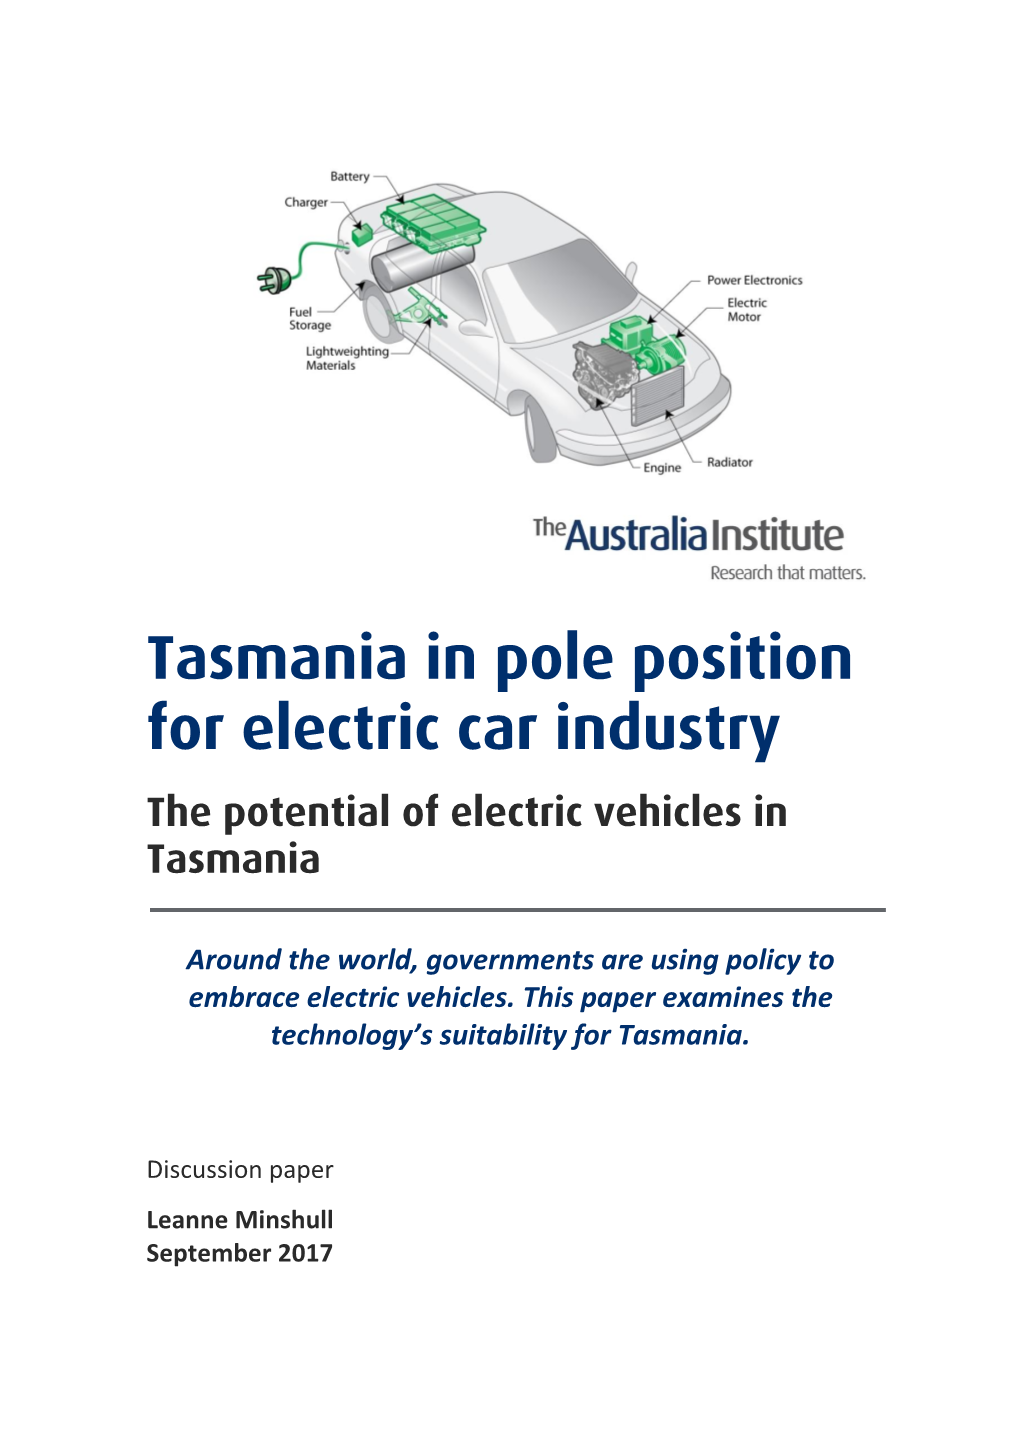 Tasmania in Pole Position for Electric Car Industry